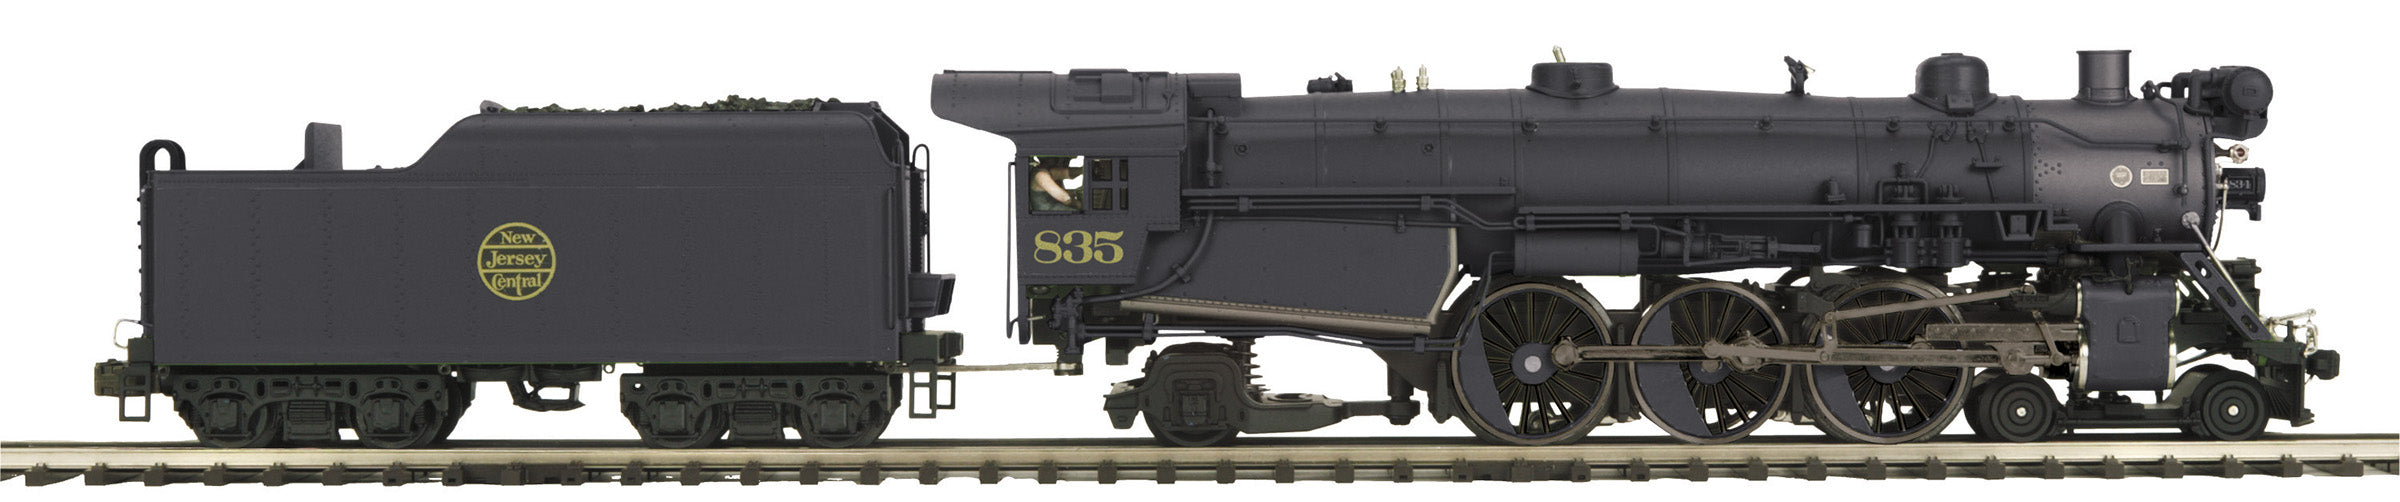 MTH 20-3923-1 - 4-6-2 P47 Baldwin Pacific Steam Engine "Jersey Central" #835 w/ PS3 (Black)